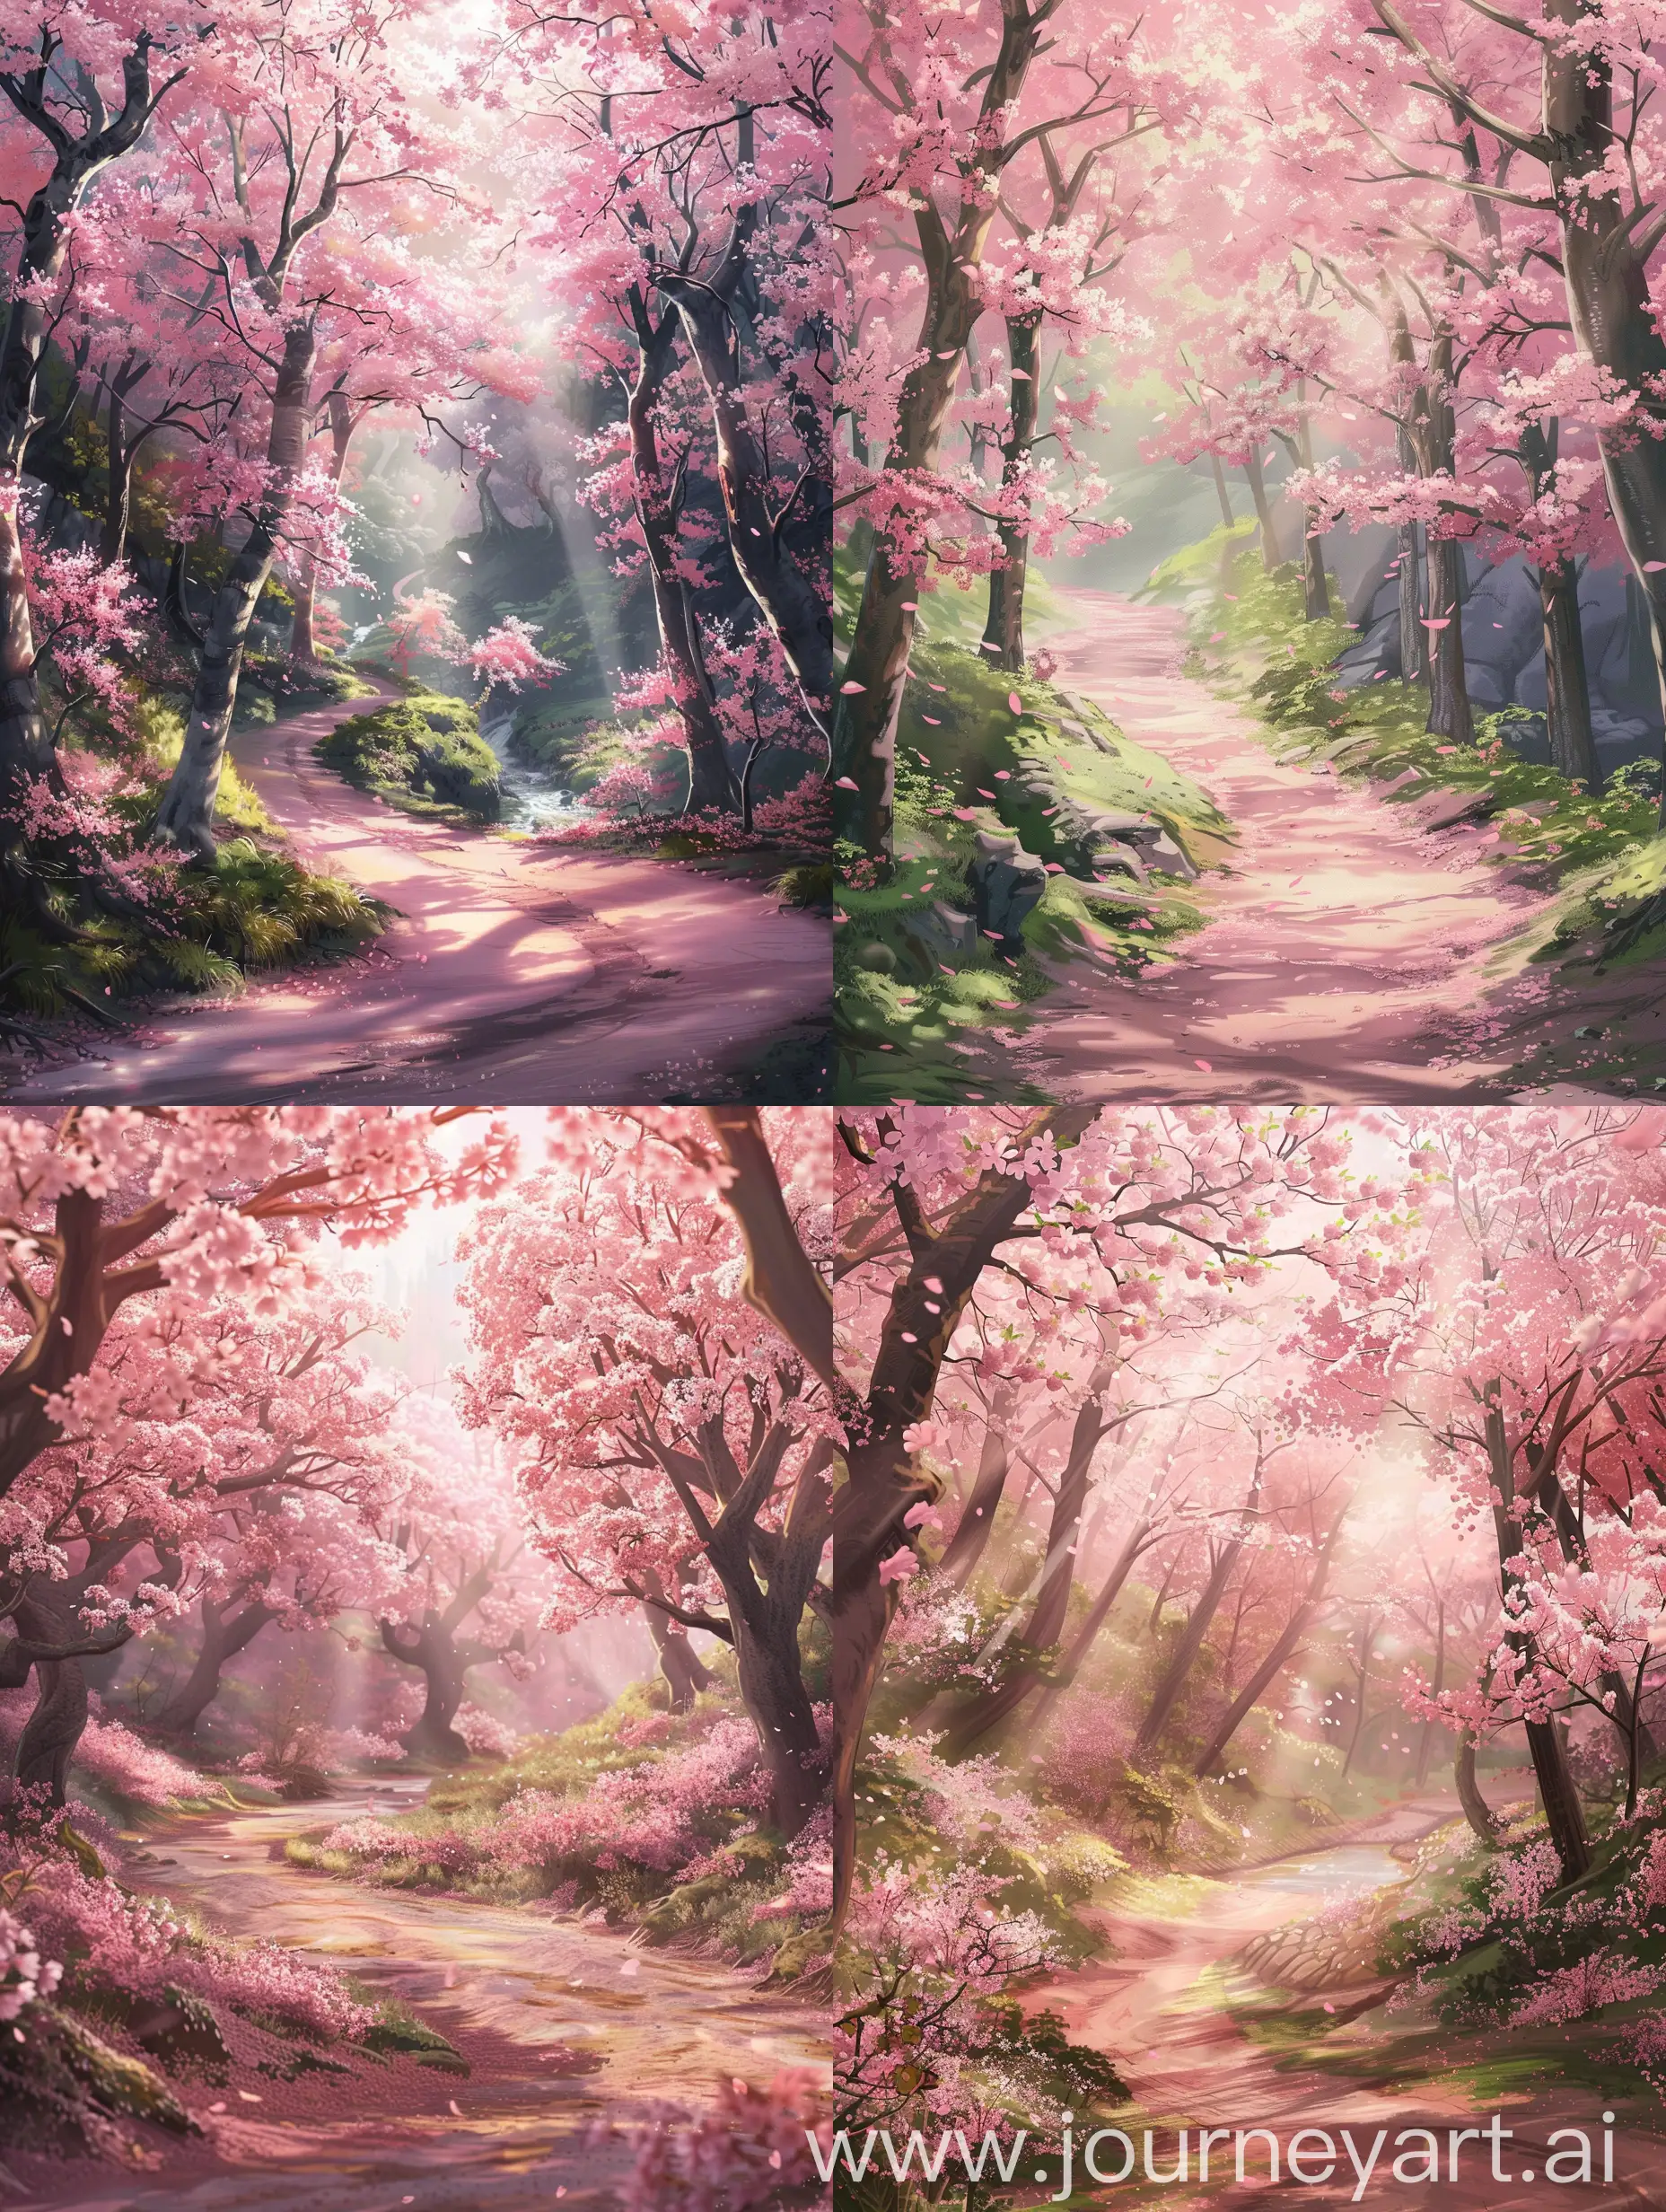 Tranquil-Cherry-Blossom-Forest-Studio-Ghibli-Anime-Scenery